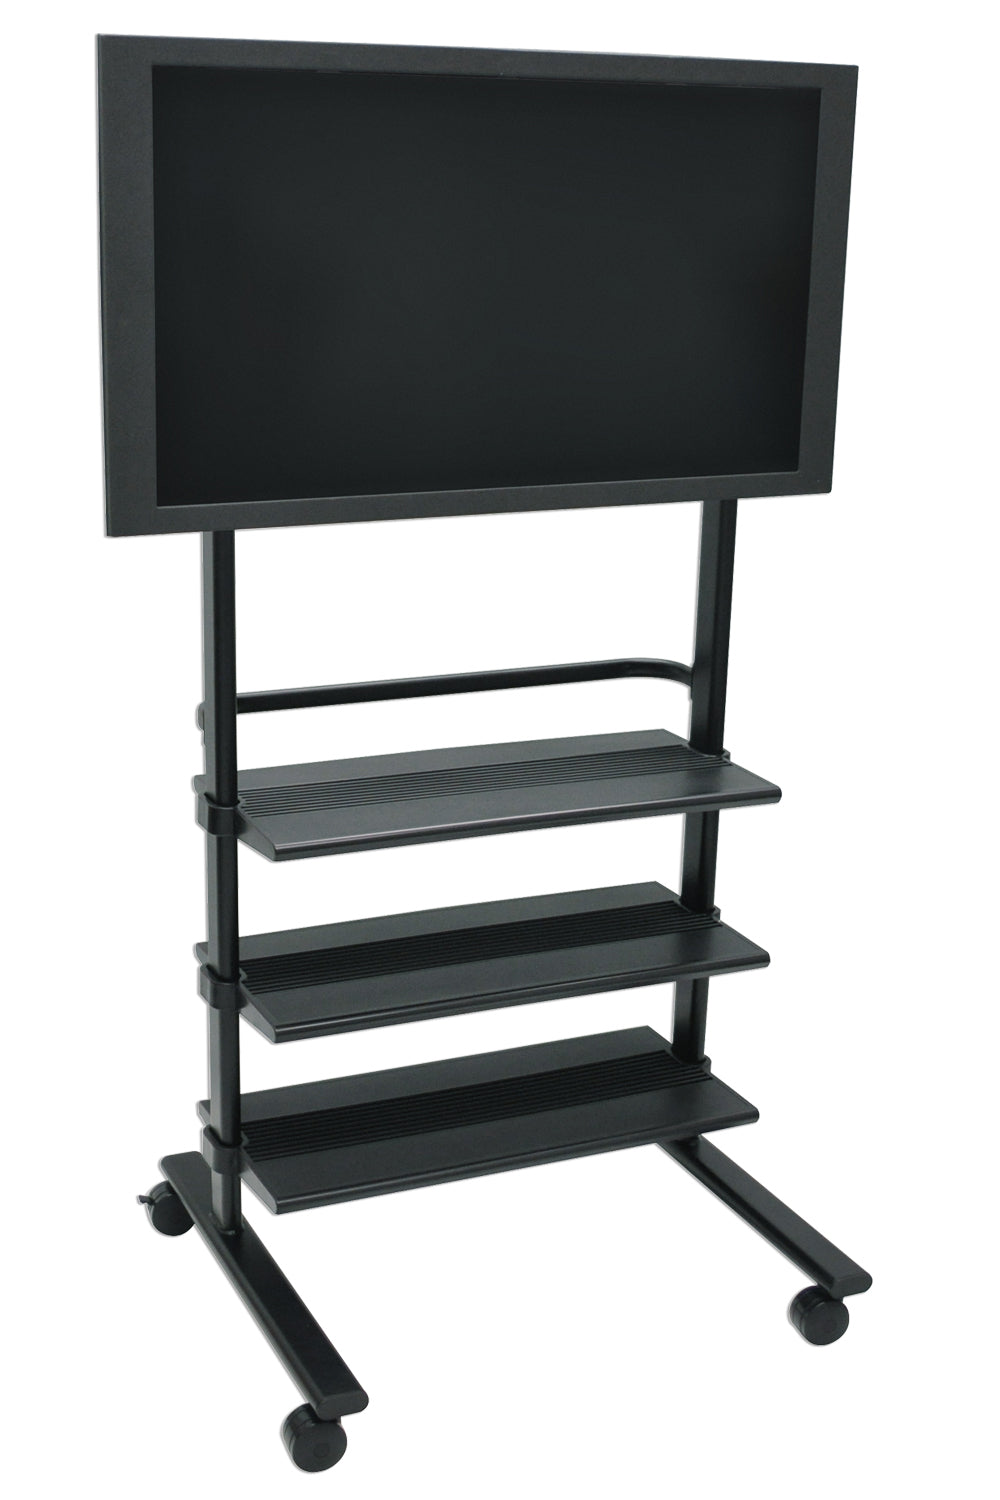 Luxor Heavy-Duty Universal Mobile Flat Panel TV Stand With Mounting Brackets Fit for Plasma / LCD Monitor, 3 Plastic Shelves, 3" Rolling Casters - YuppyCollections